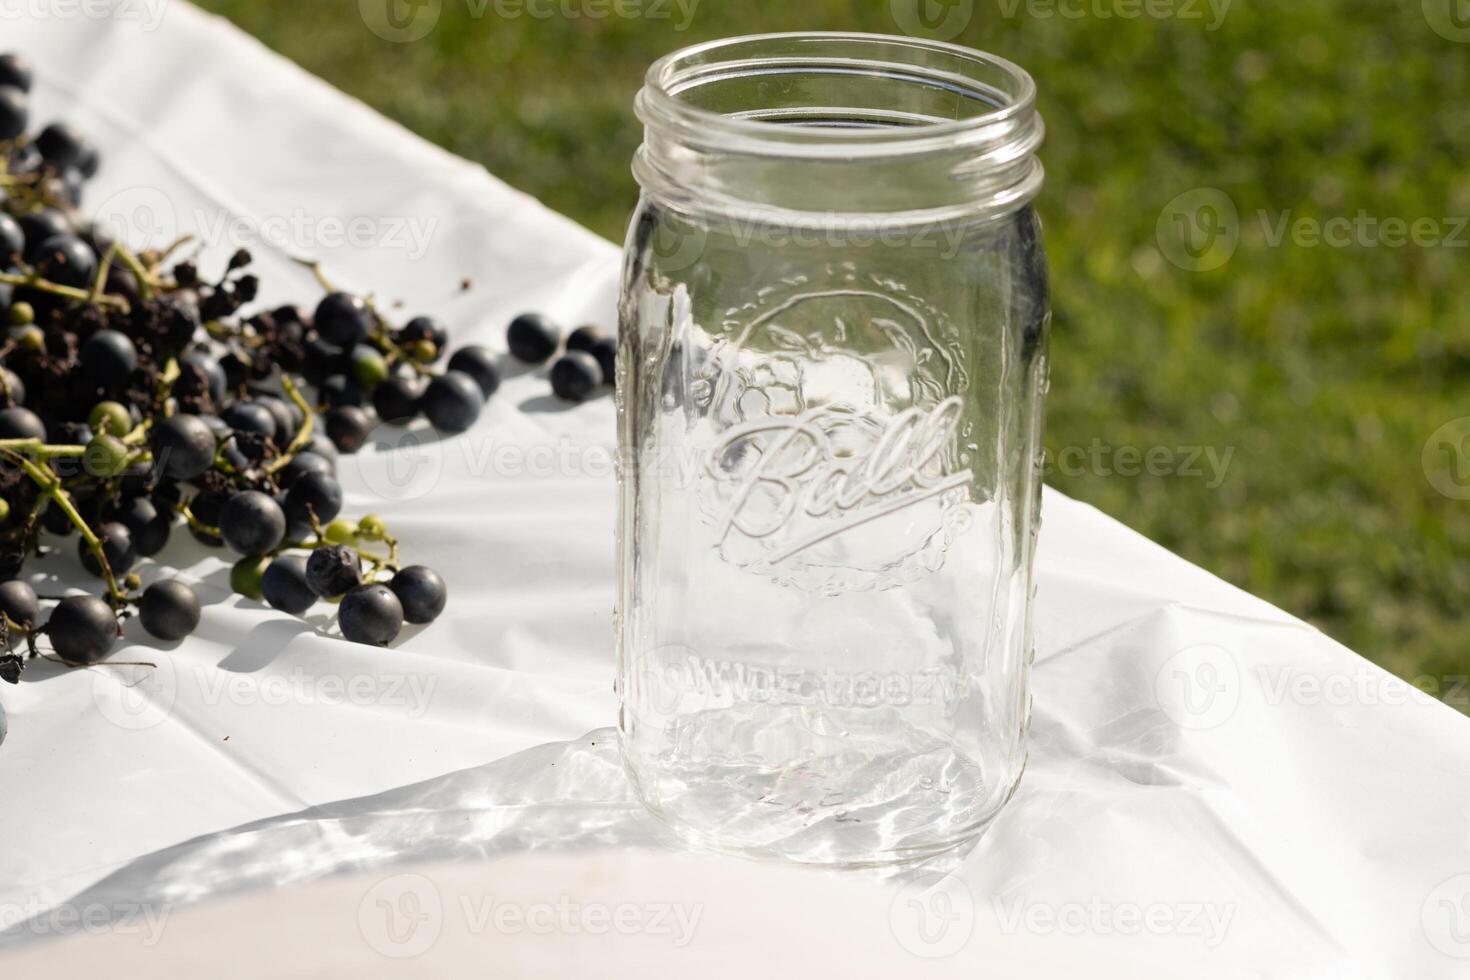 I love the look of these concord grapes spread out on the table with a white background. The deep purple orbs all over. The Ball jar out reminds you of canning or preserving your food. photo